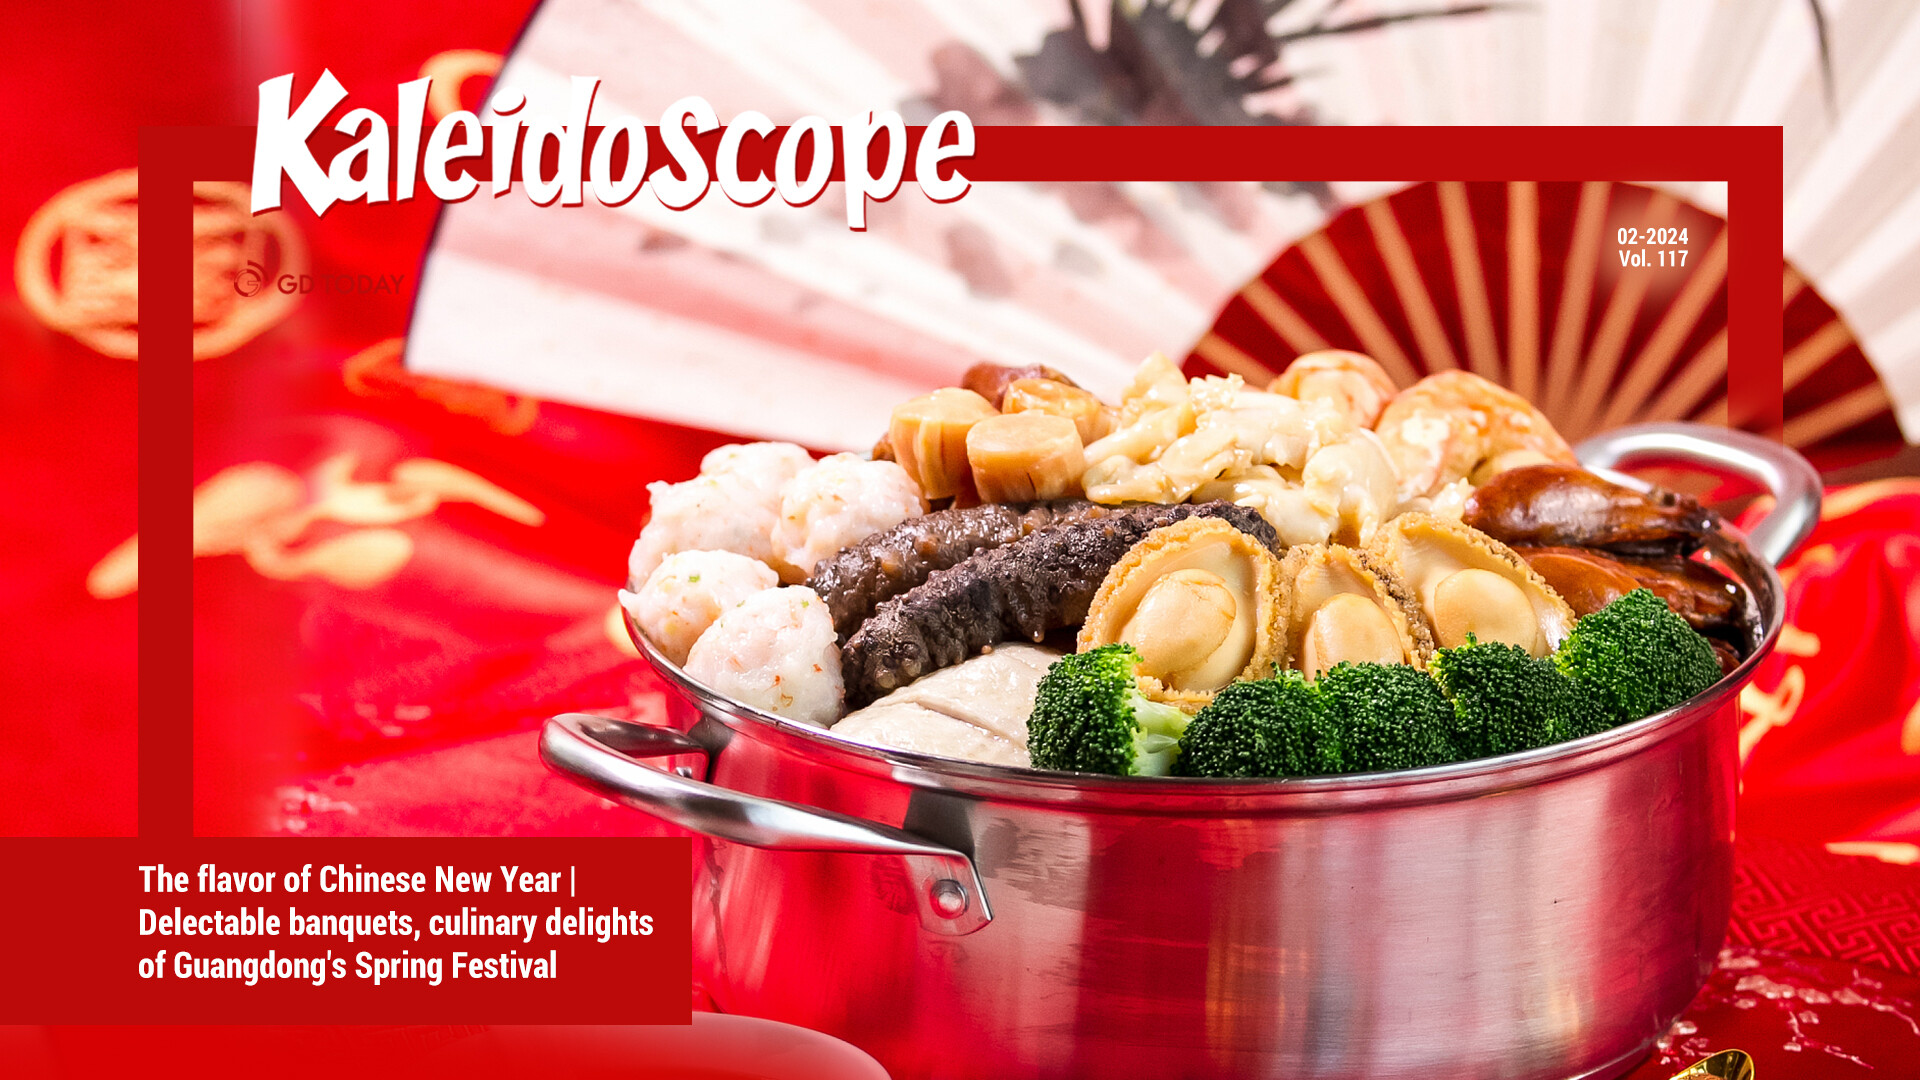 The flavor of Chinese New Year | Delectable banquets, culinary delights of Guangdong